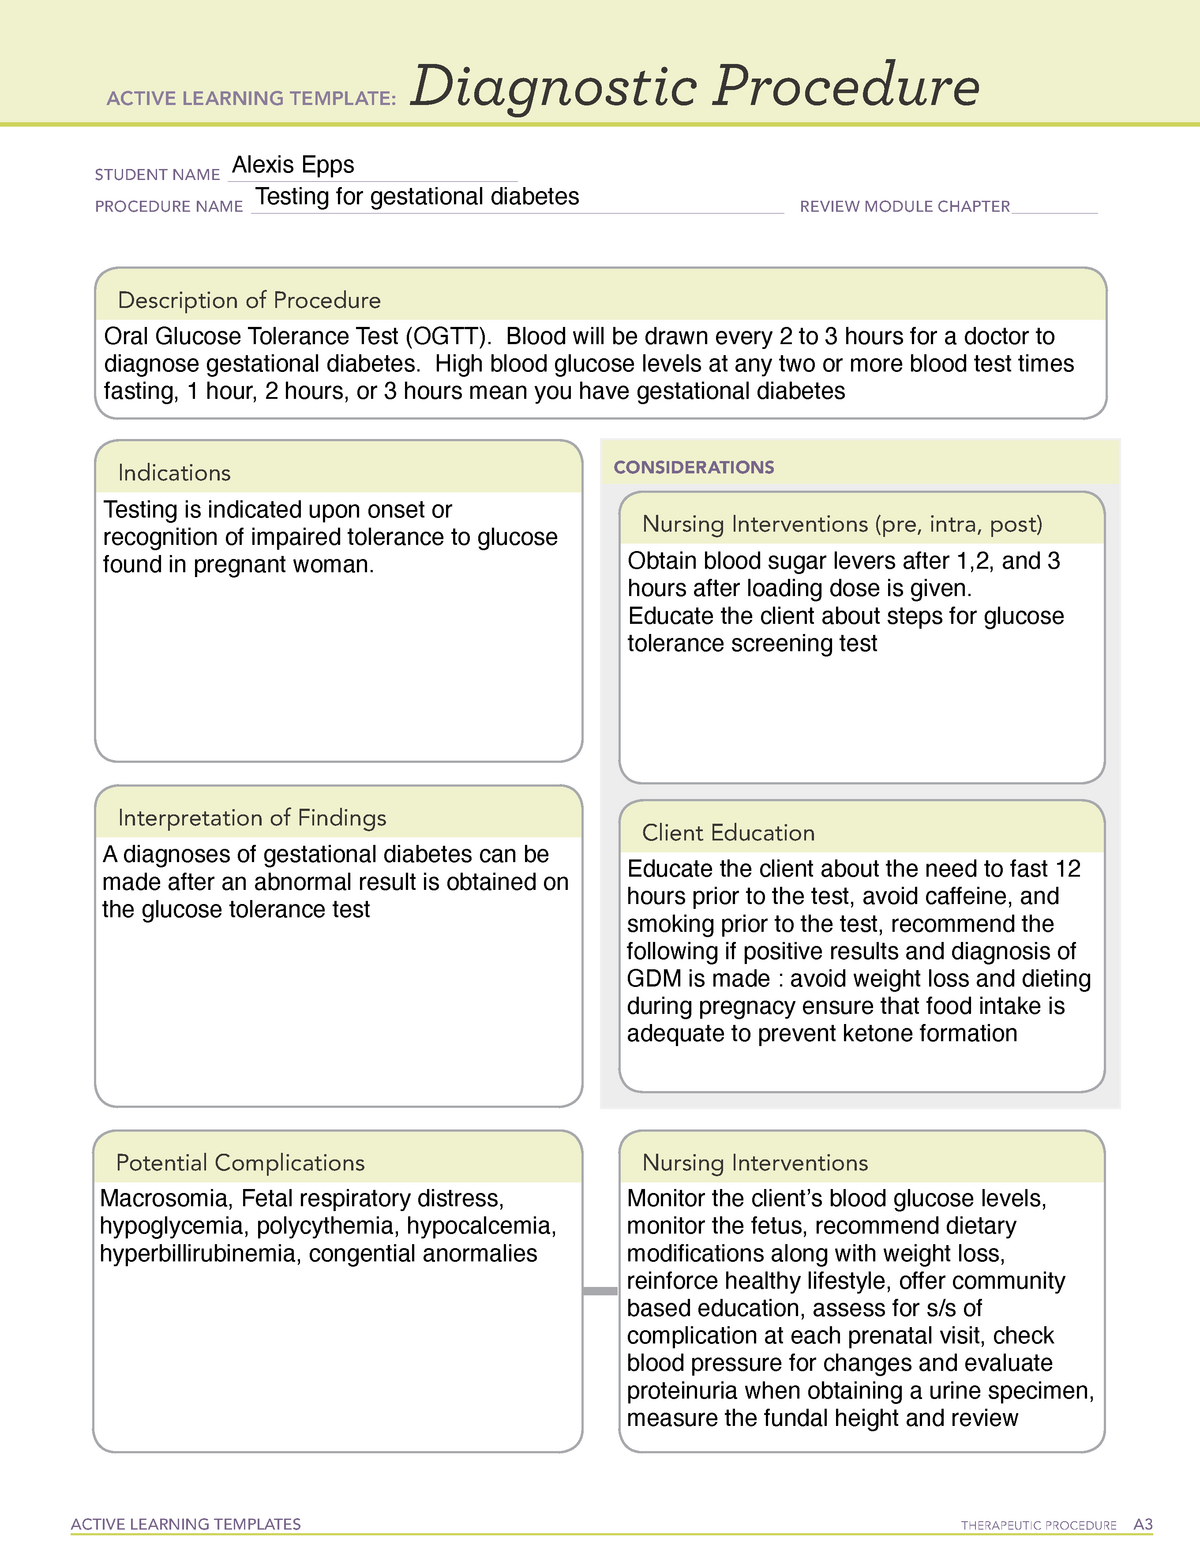 active-learning-template-diagnostic-procedure-form-active-learning